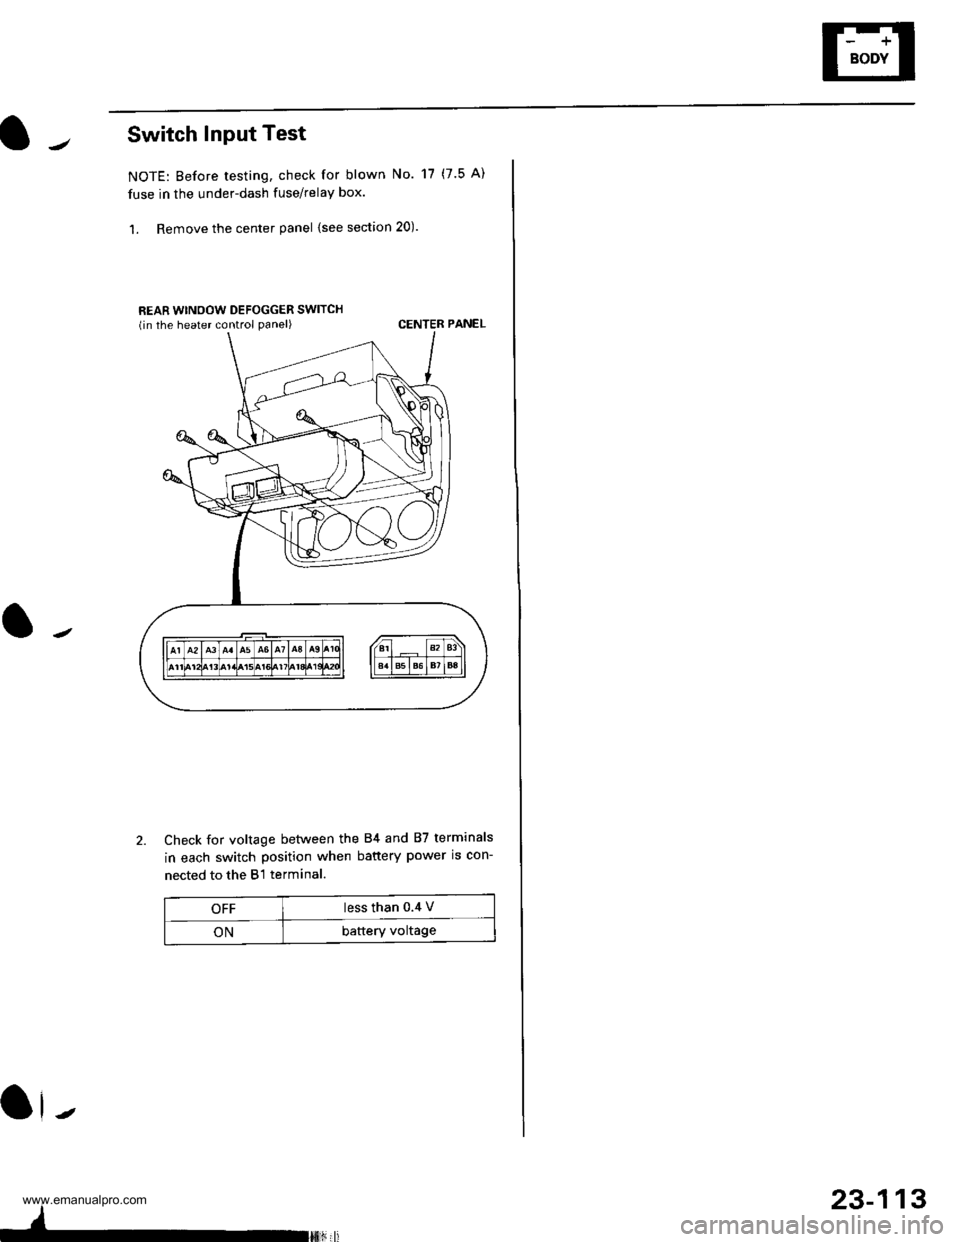 HONDA CR-V 1998 RD1-RD3 / 1.G Owners Manual 
Switch Input Test
NOTE: Before testing, check for blown No. 17 (7.5 A)
fuse in the under-dash fuse/relay box.
1. Remove the center panel {see section 20).
REAR WINOOW DEFOGGER SWITCHlin the heater co